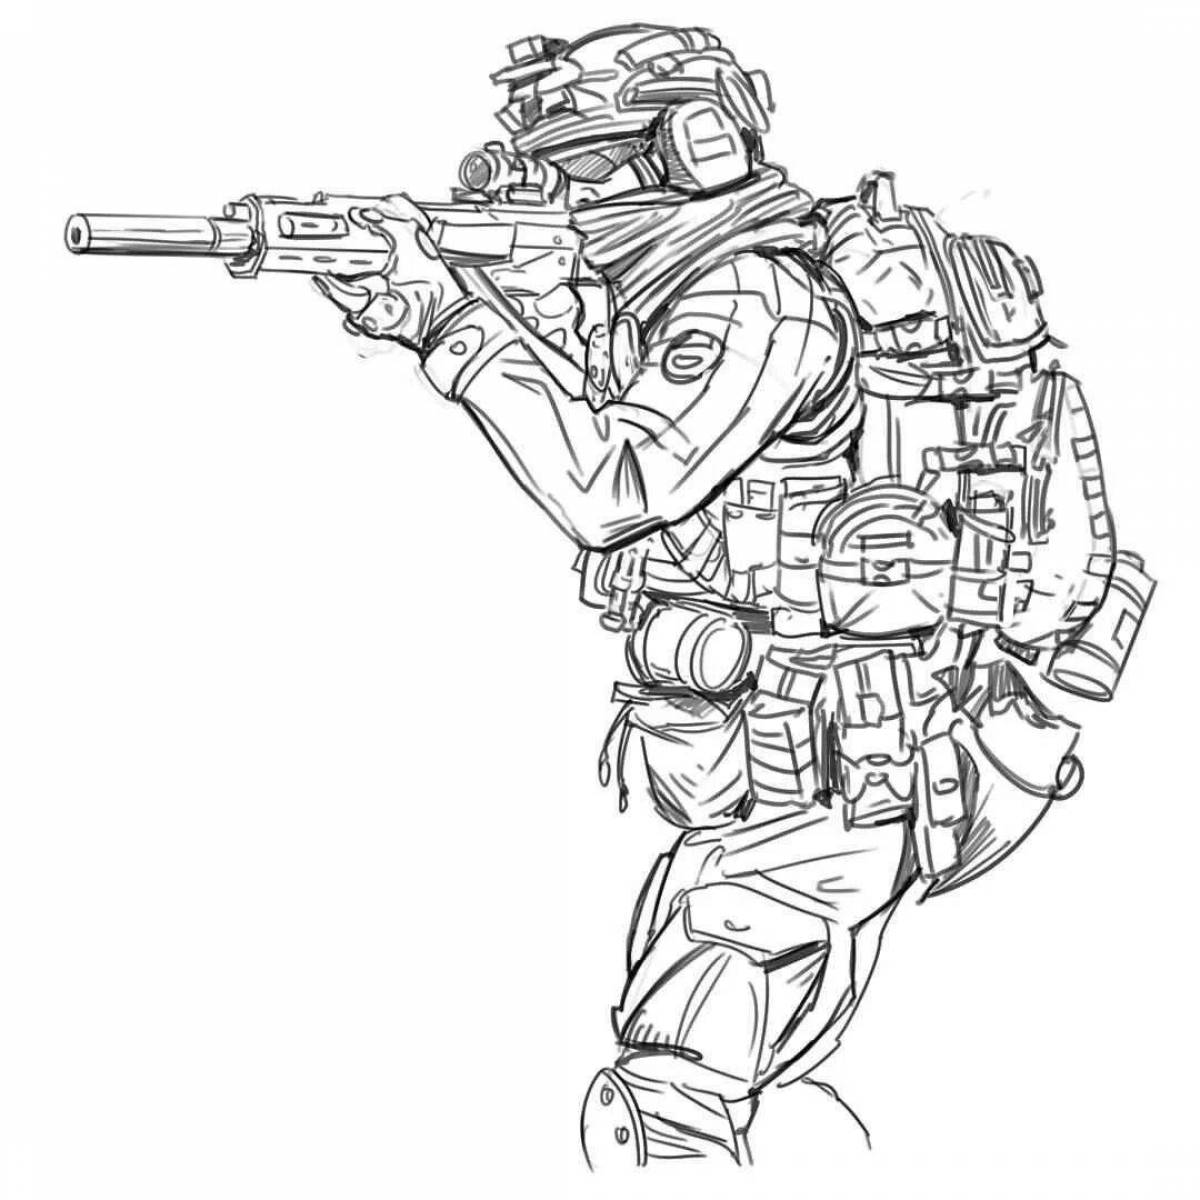 Coloring page of army special forces